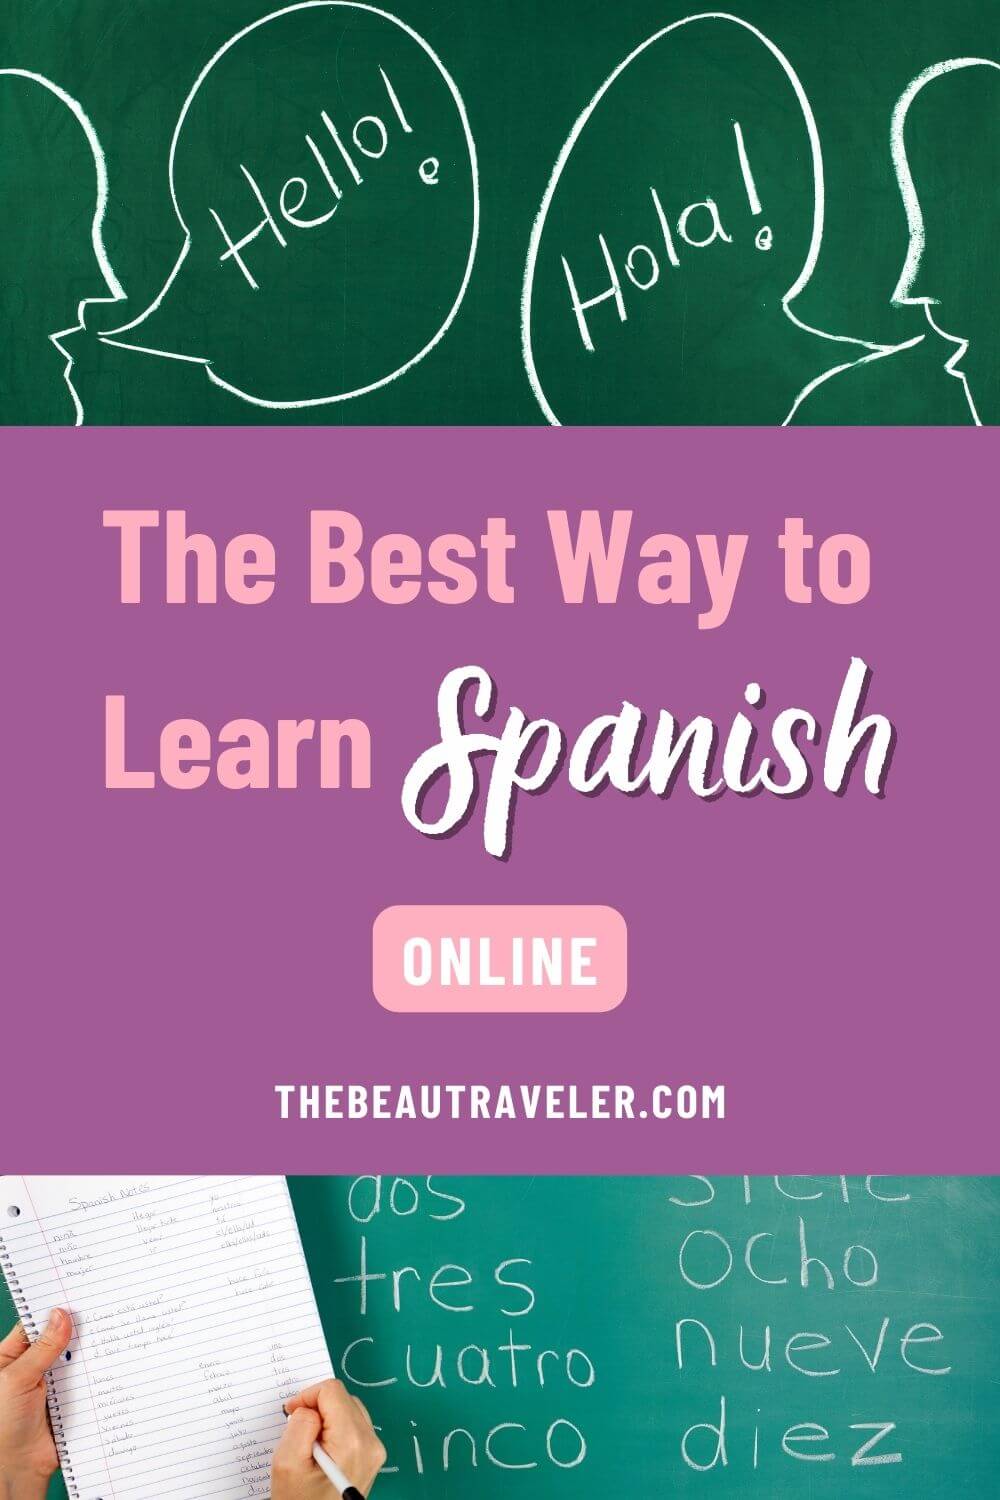 How to Find Online Teachers for One-on-One Spanish Classes: Your Guide to Personalized Learning - The BeauTraveler